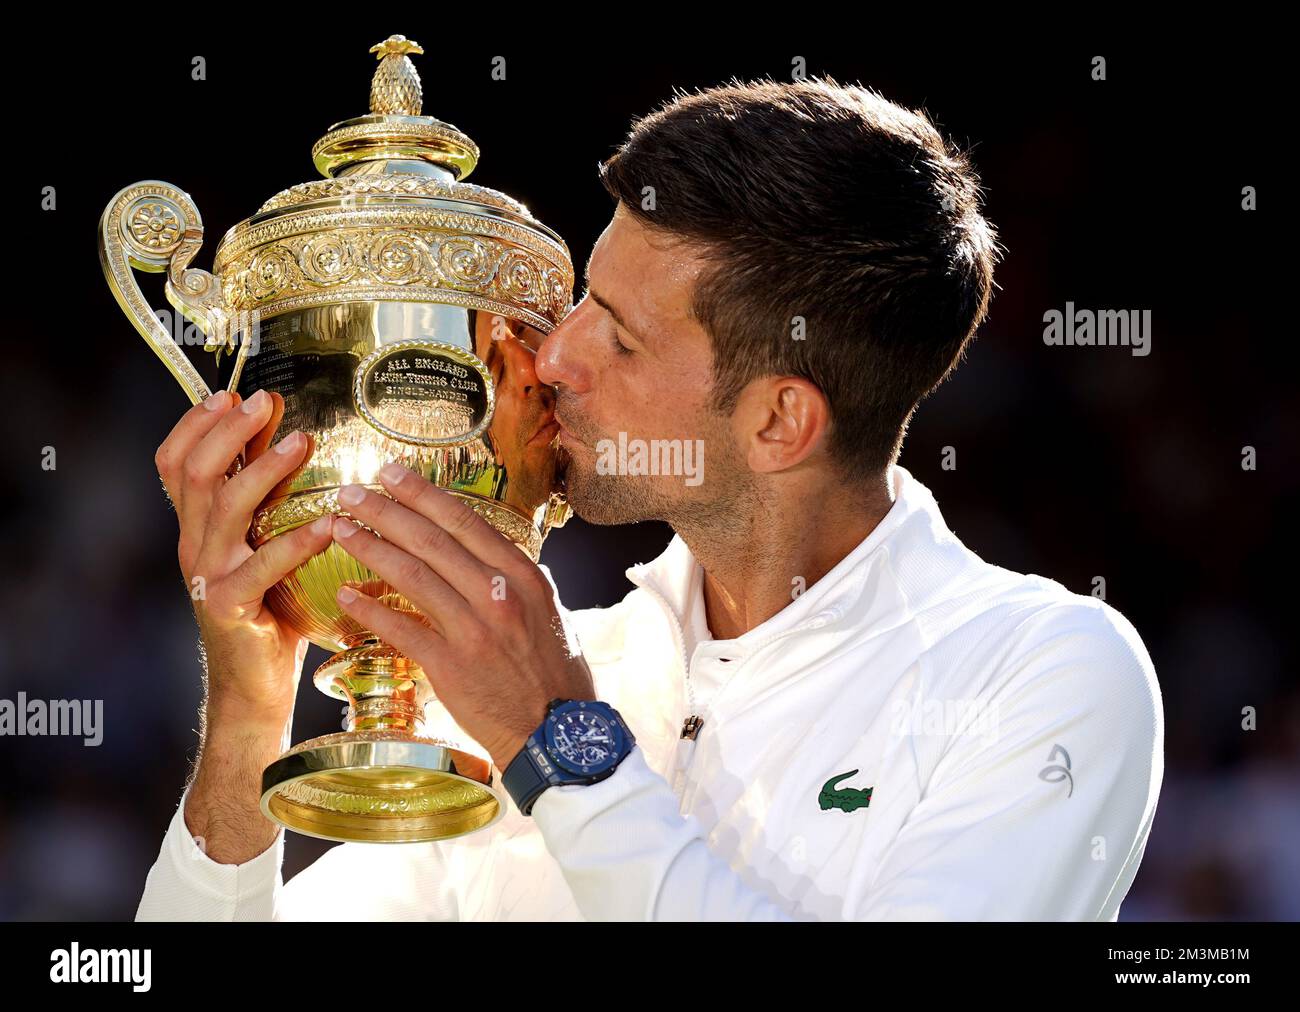 File photo dated 10-07-2022. Novak Djokovic kisses the trophy after maintaining his stranglehold on Wimbledon. The Serbian beat a frustrated Nick Kyrgios 4-6 6-3 6-4 7-6 (3) to win a fourth consecutive title at the All England Club and a 21st grand slam crown. Another memorable centre court triumph was the highlight of a difficult year for Djokovic in which he was unable to compete at the Australian Open and the US Open due to his anti-vaccination stance. Issue date: Friday December 16, 2022. Stock Photo